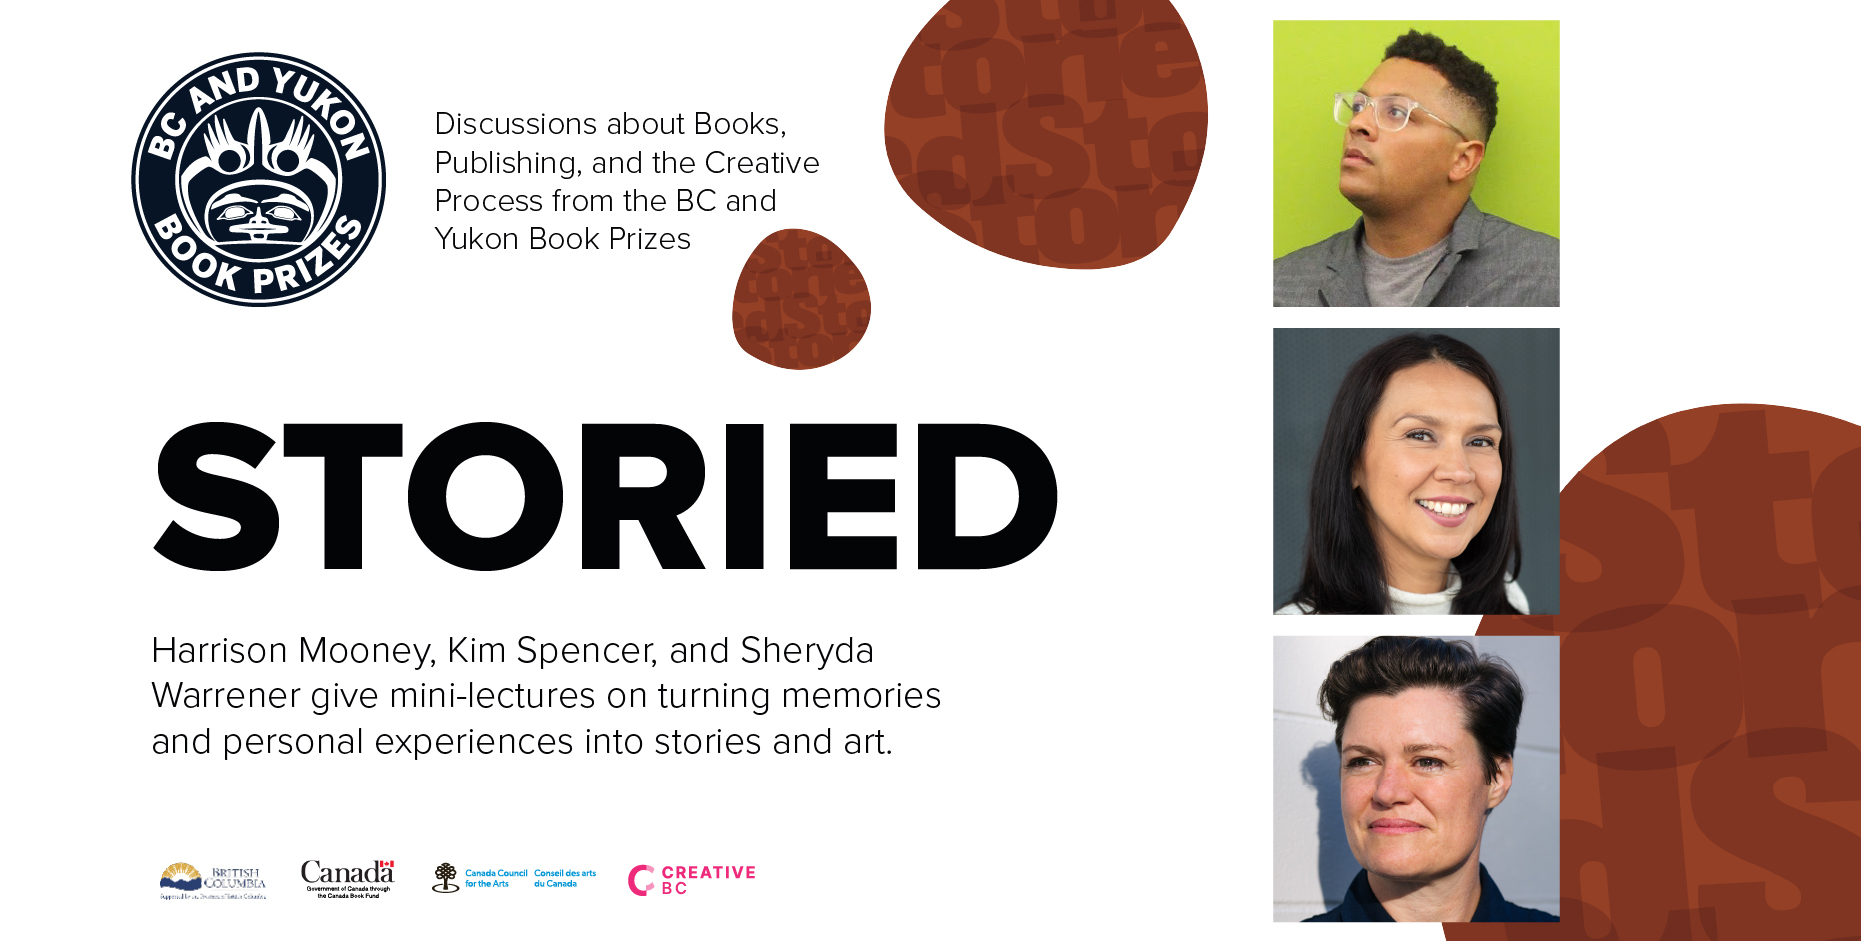 Storied: Turning memories and personal experiences into stories and art with Harrison Mooney, Kim Spencer, and Sheryda Warrener